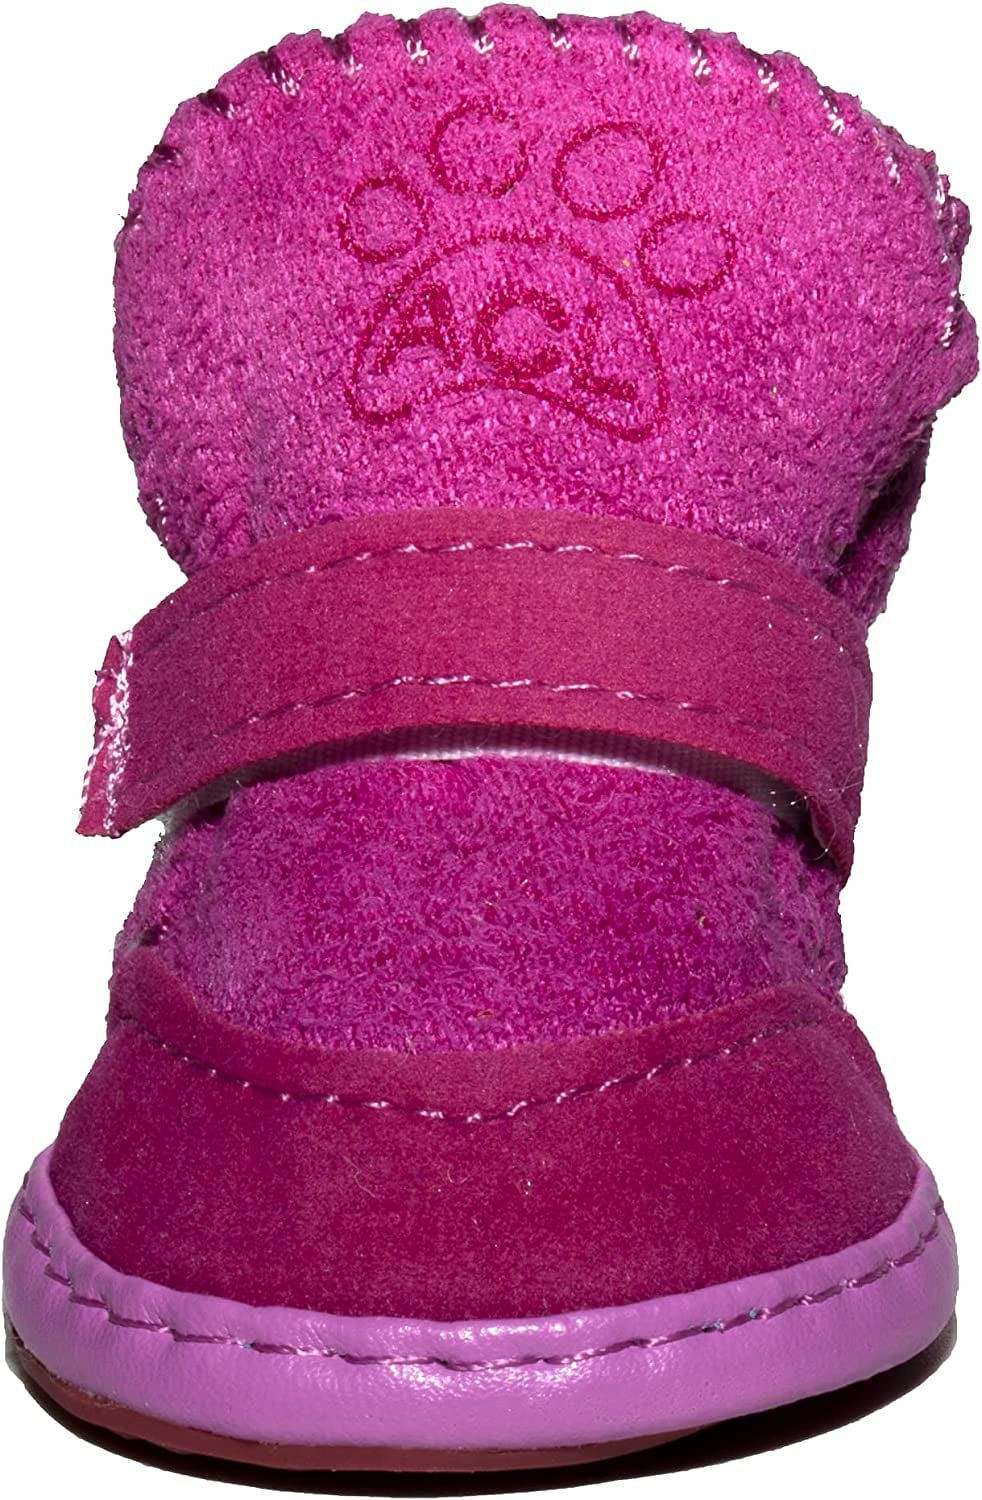 Small Dog Winter Booties, Cold Weahter Dog Shoes for Small Dogs, Boots for Cats, Yorkie, Chihuahua Cozy Boots Purple Size 4